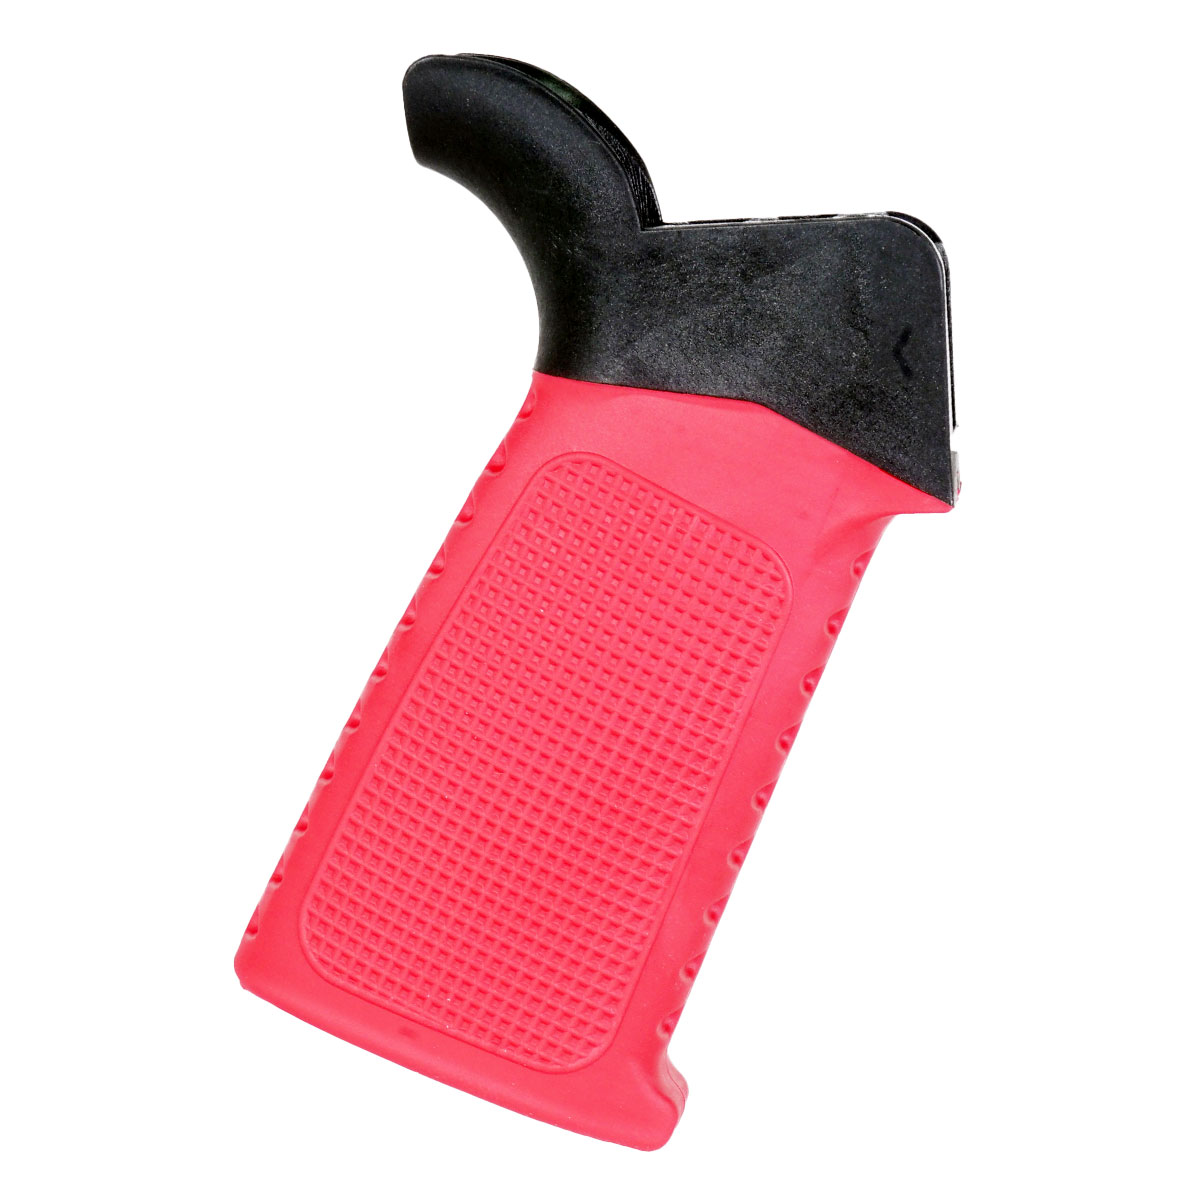 Team Accessories Corp AR15 Grip Window Grip Flared Textured/Ribbed Red